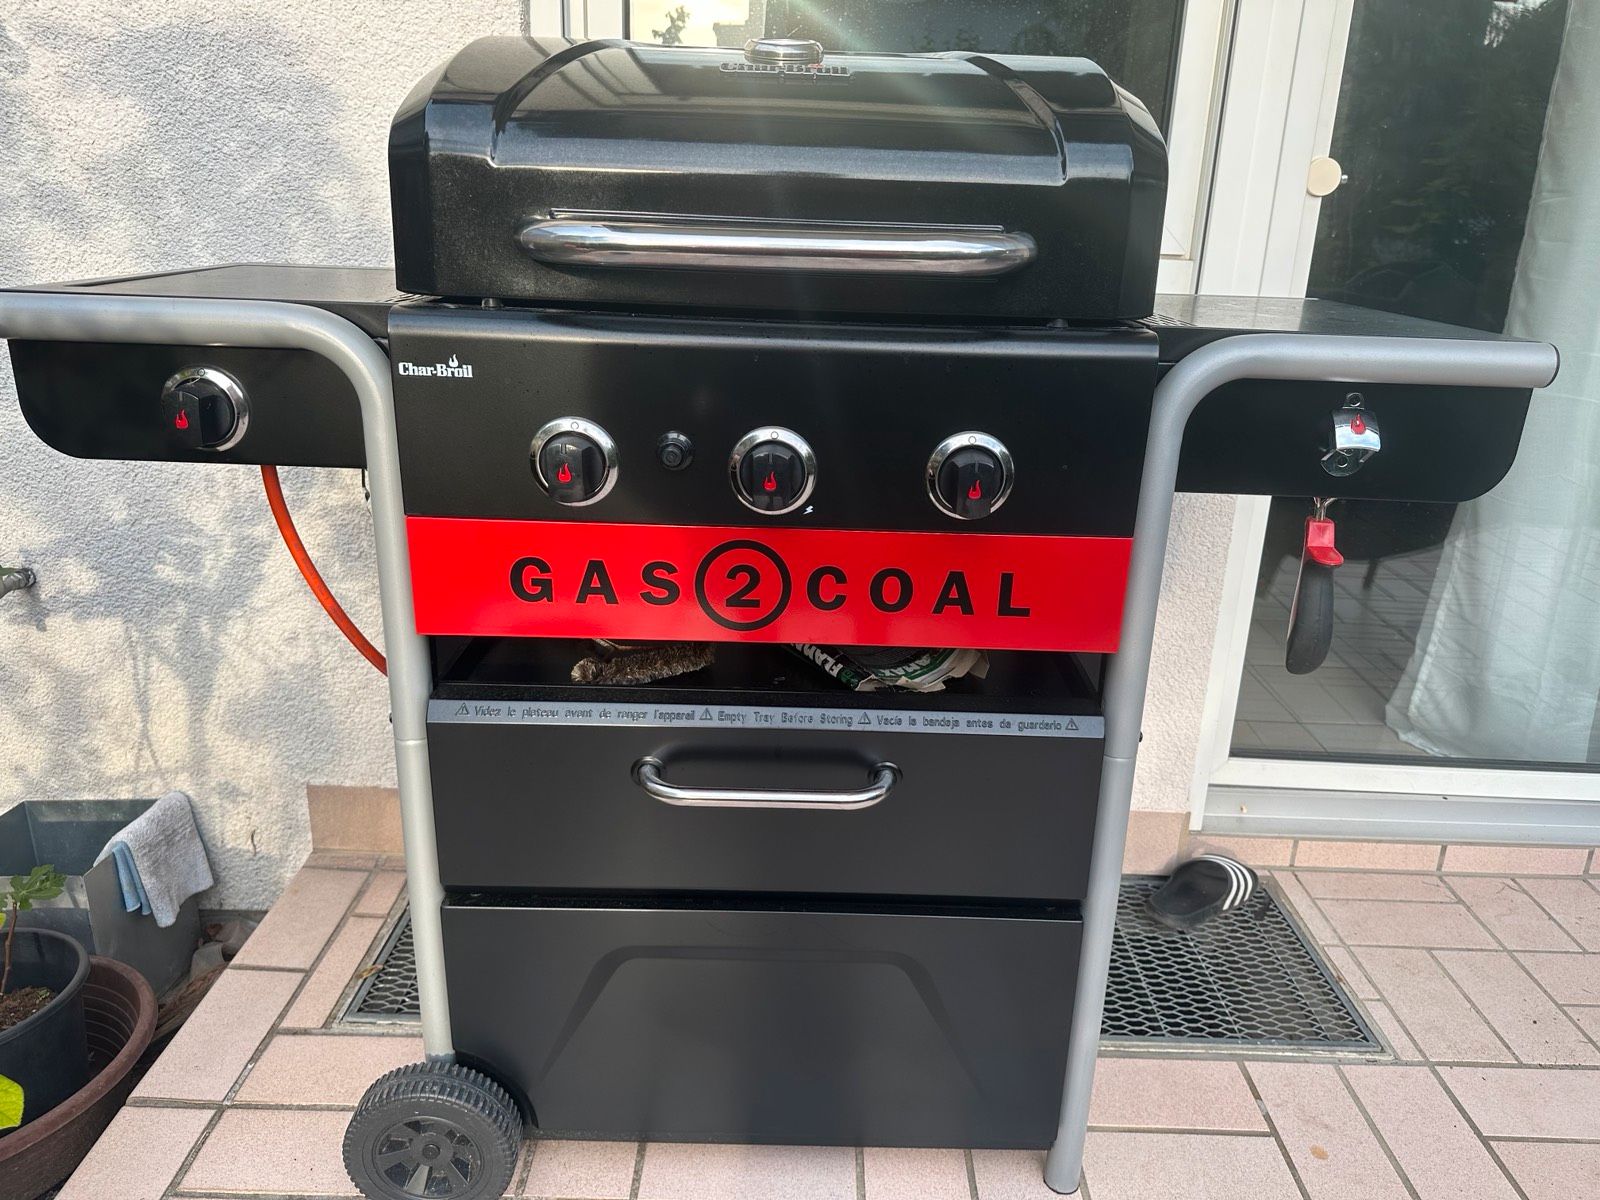 Char-Broil Gas2Coal 330 Hybrid Grill Test